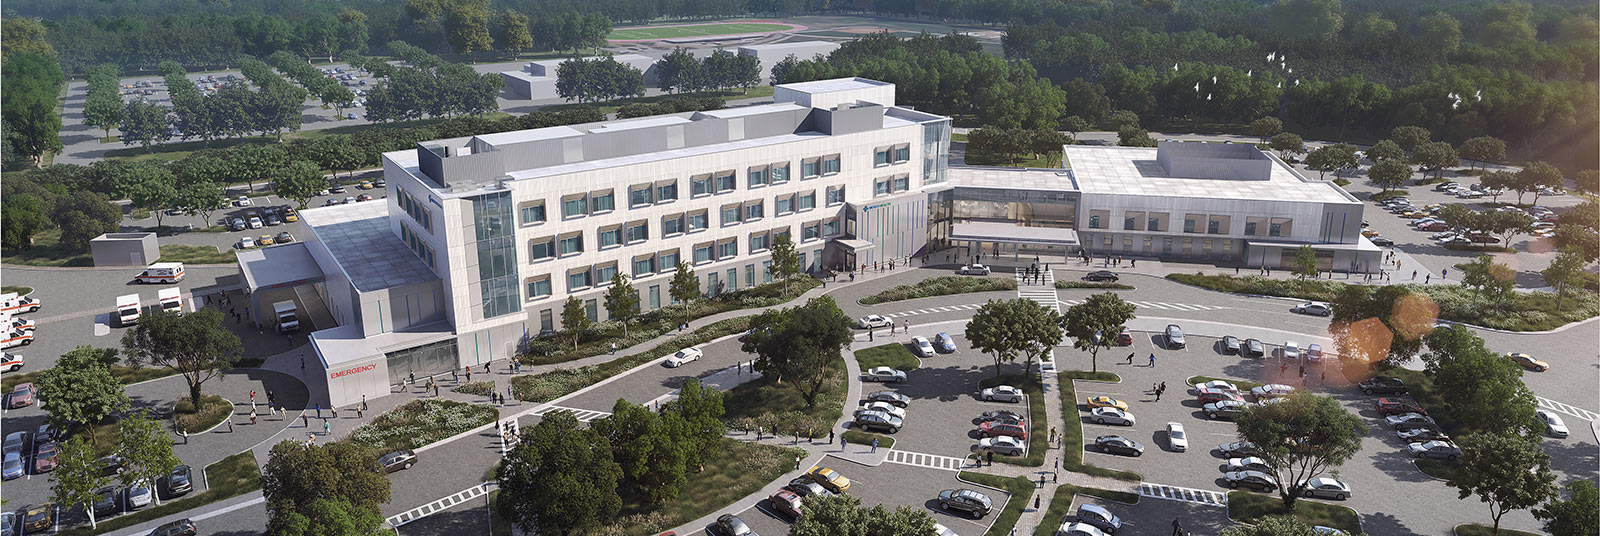 Rendering of the new Kings Mills Hospital courtesy of GBBN.